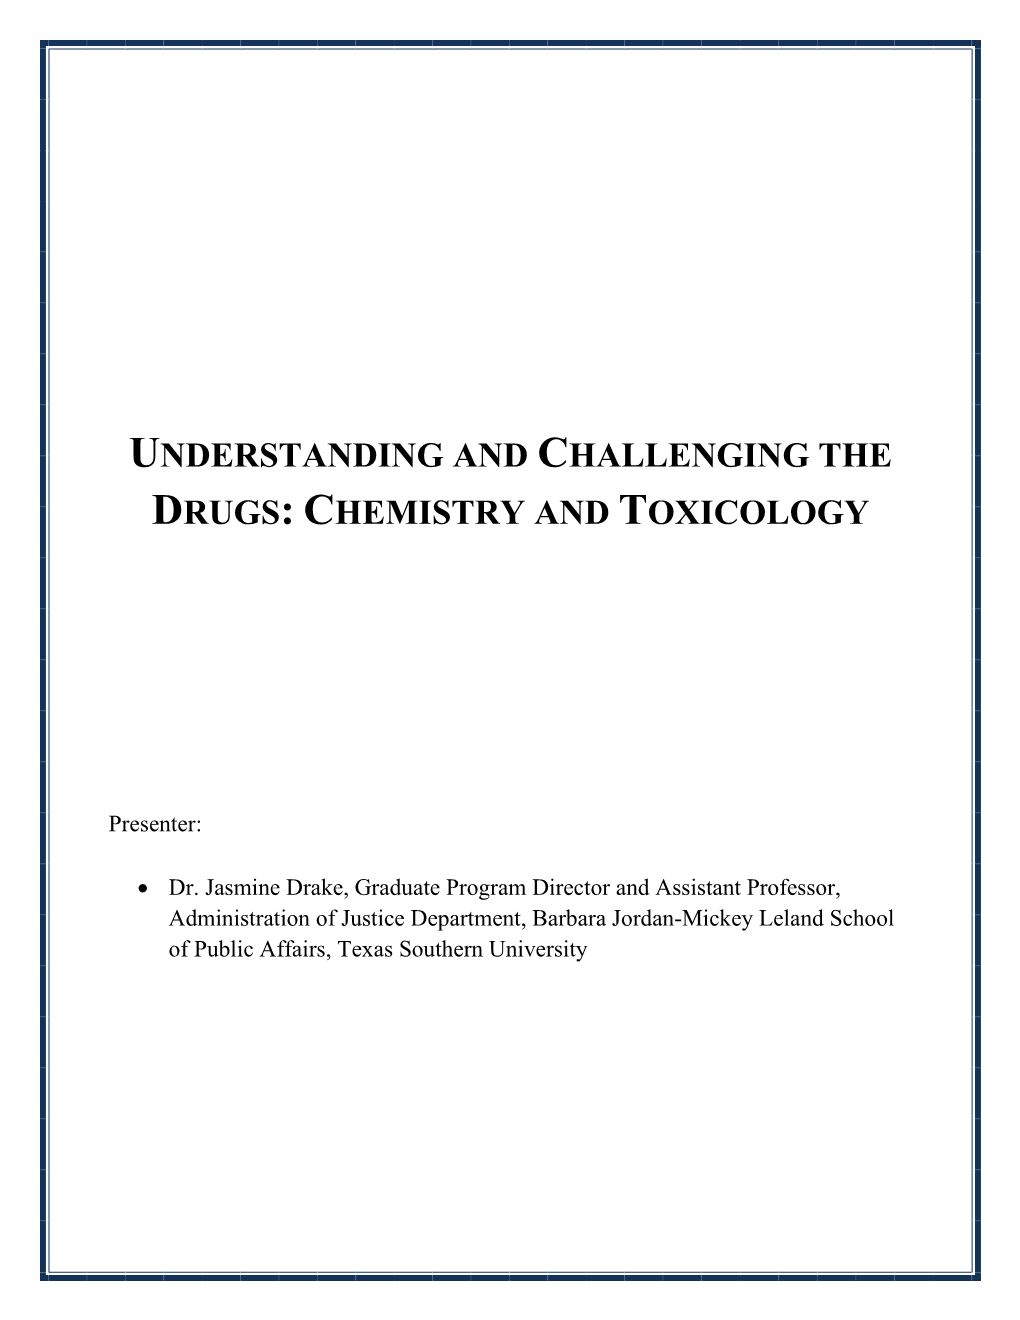 Understanding and Challenging the Drugs: Chemistry and Toxicology